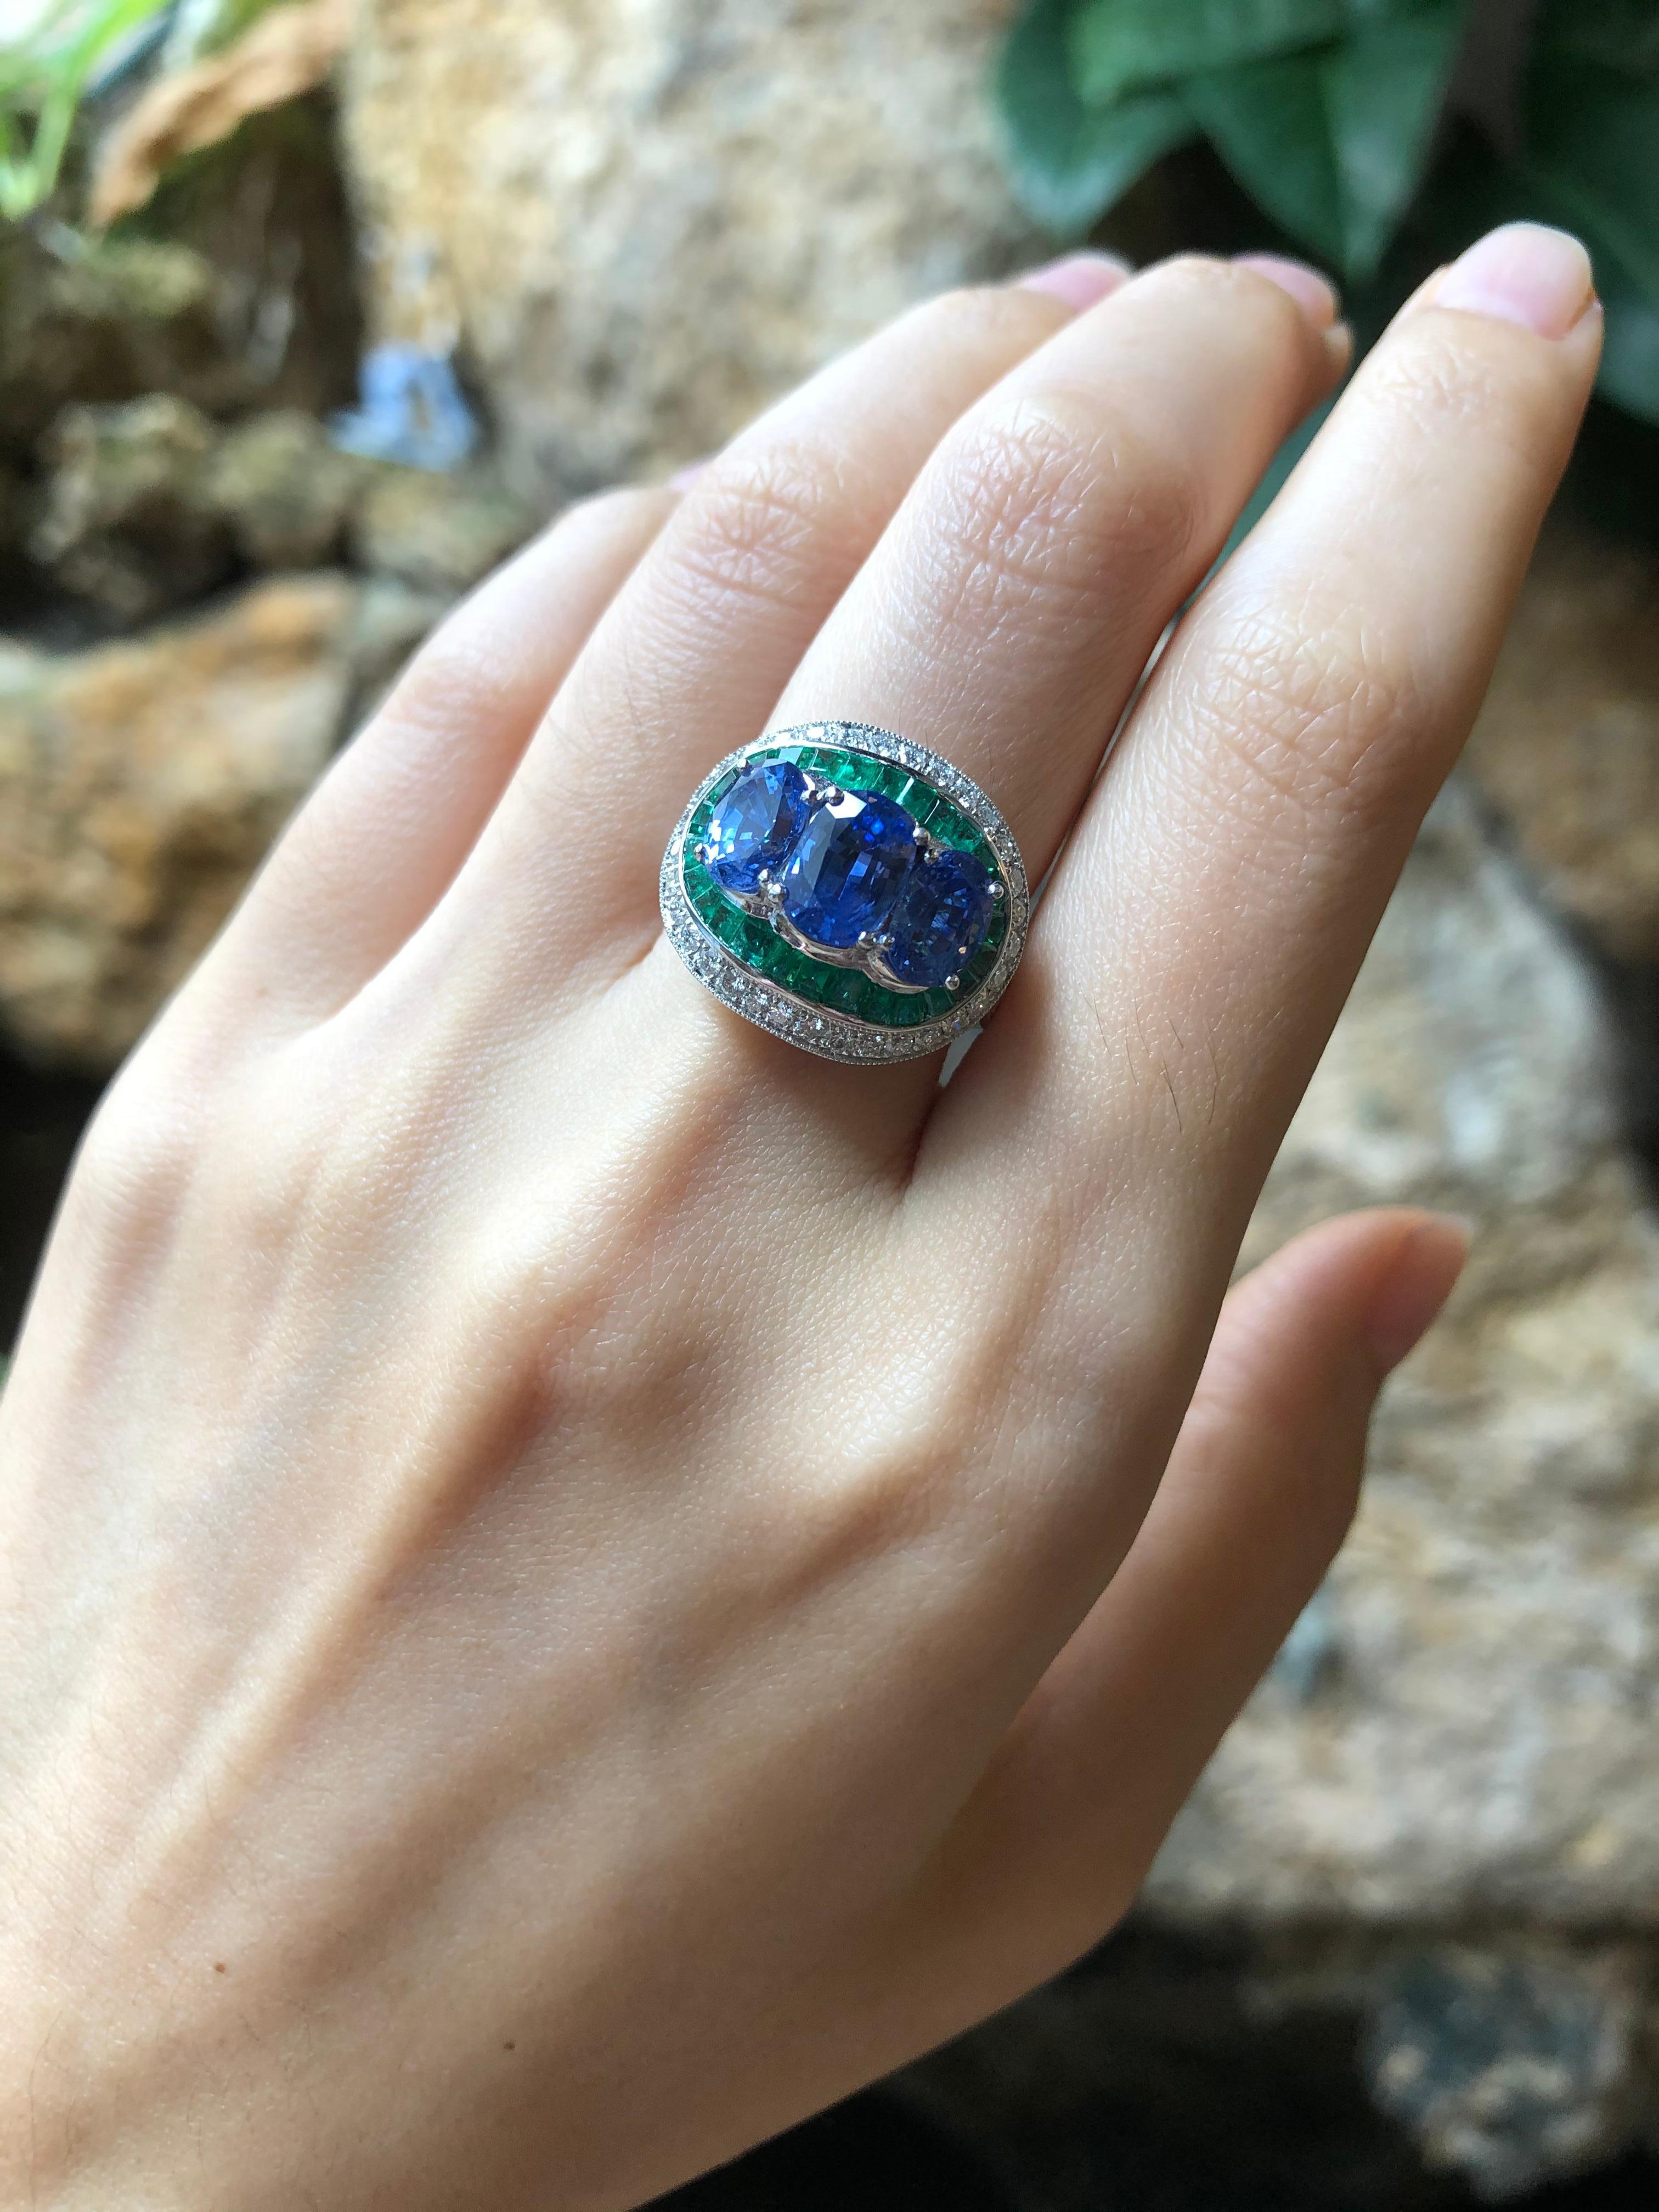 Blue Sapphire 3.46 carats with Emerald 1.61 carats and Diamond 0.67 carat Ring set in 18 Karat White Gold Settings

Width:  1.9 cm 
Length: 1.7 cm
Ring Size: 52
Total Weight: 8.38 grams

